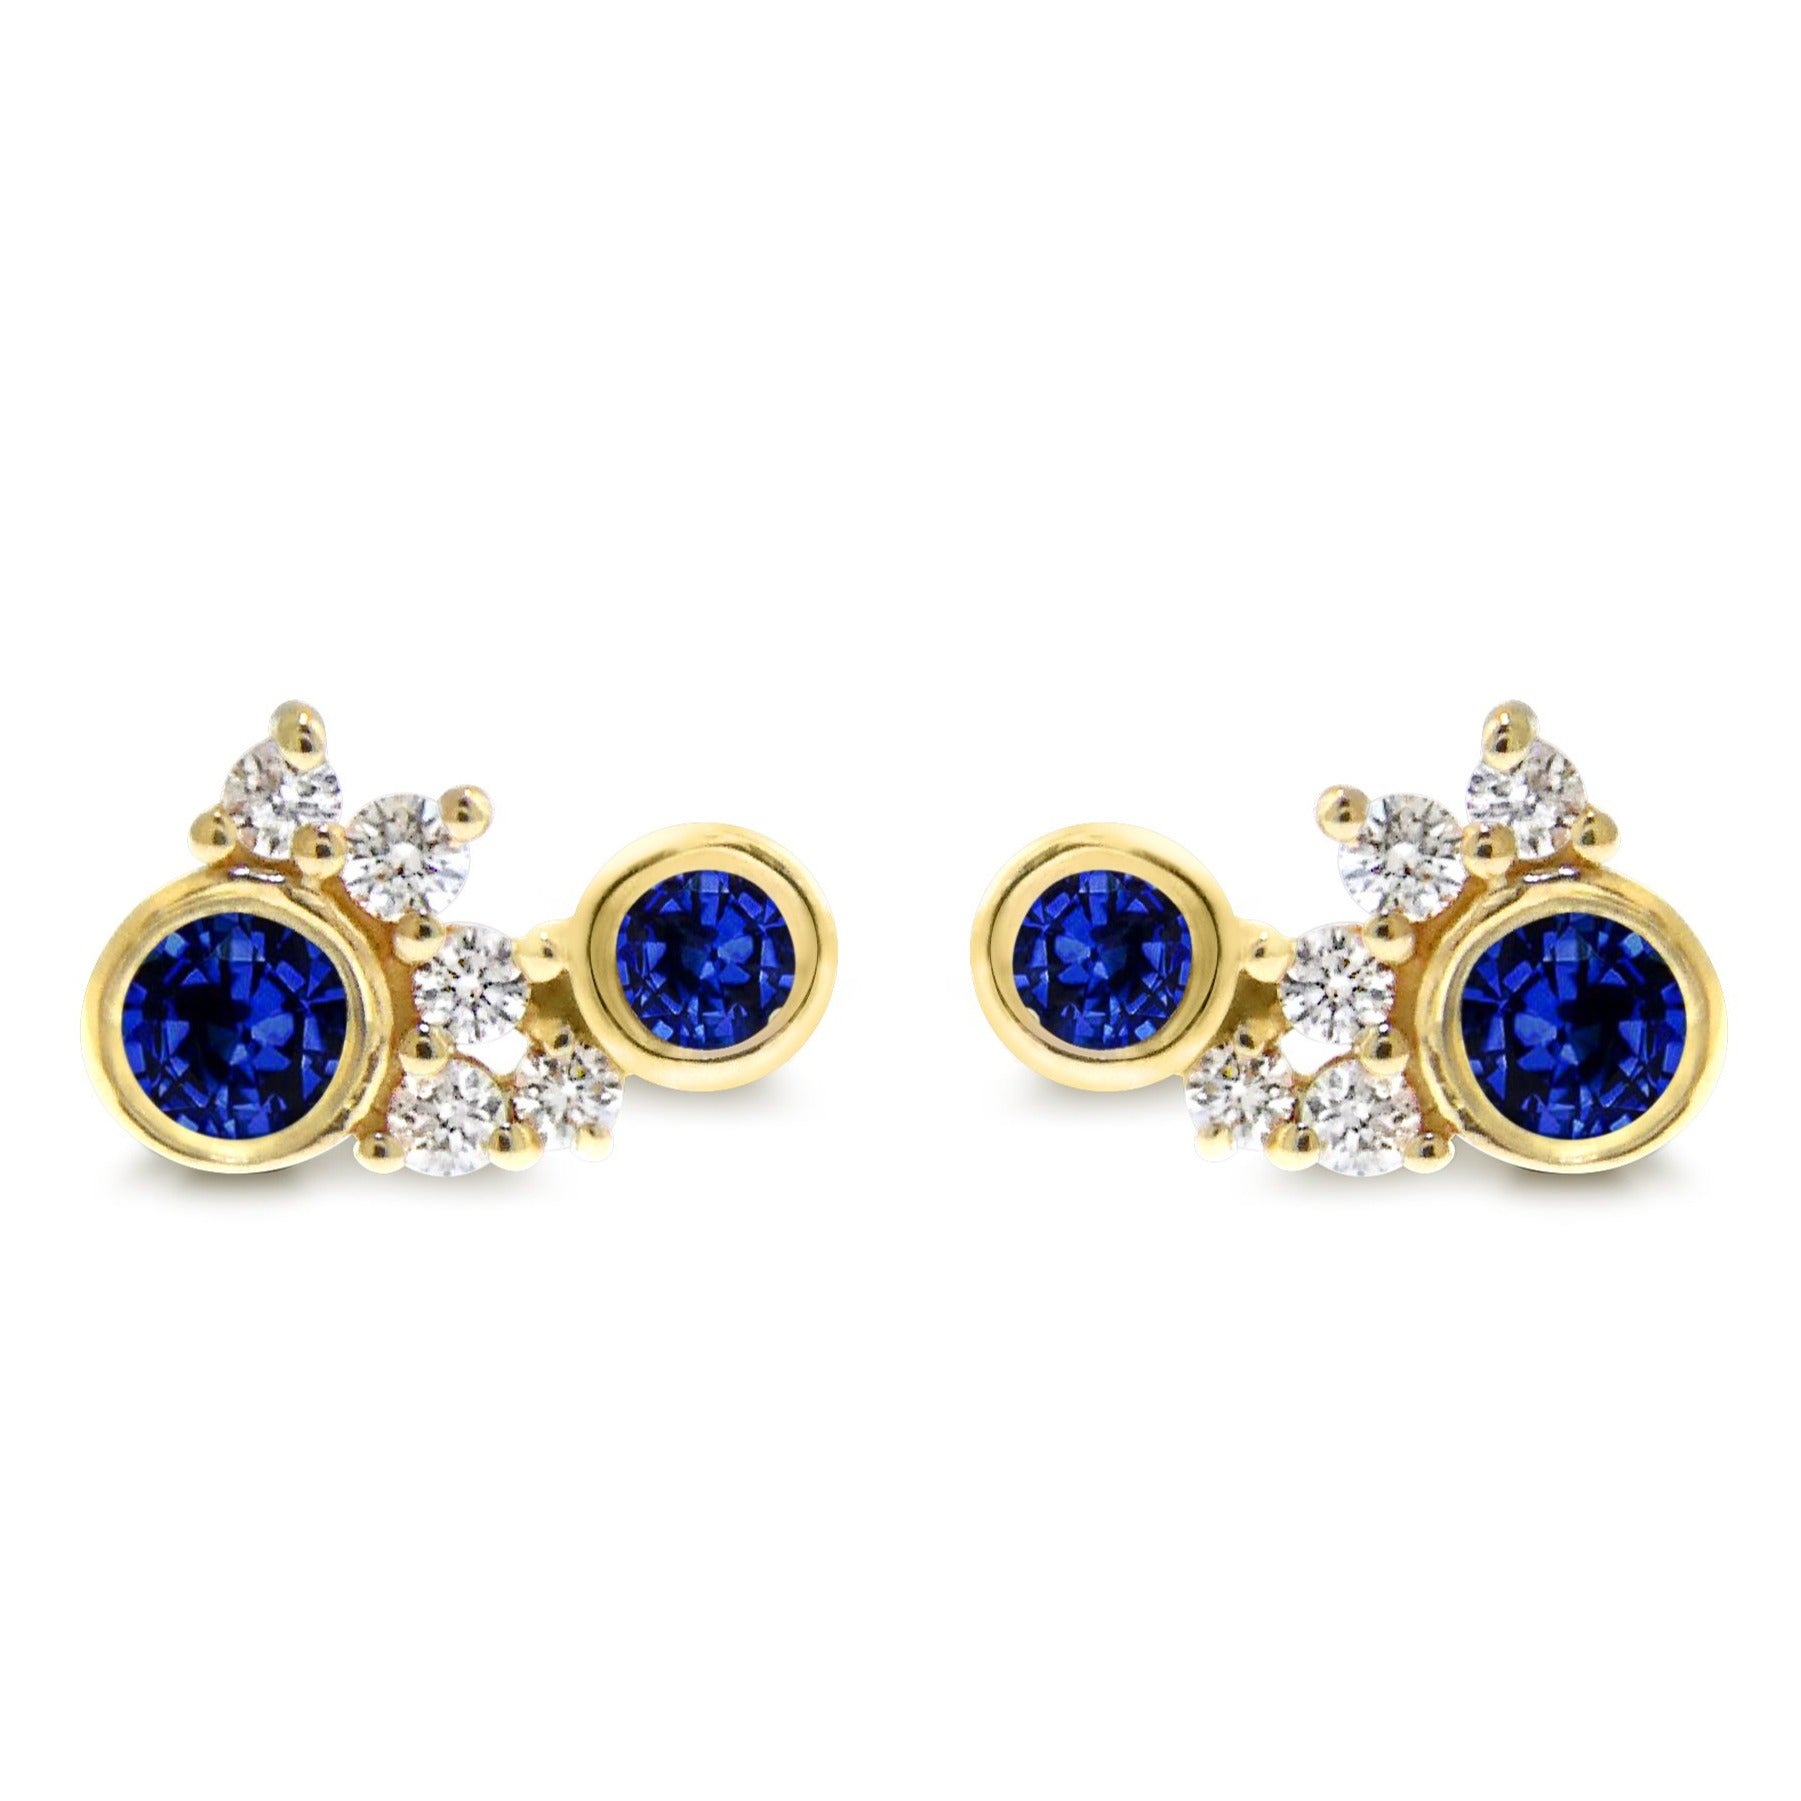 Everly Stud Earrings with Diamond Accents